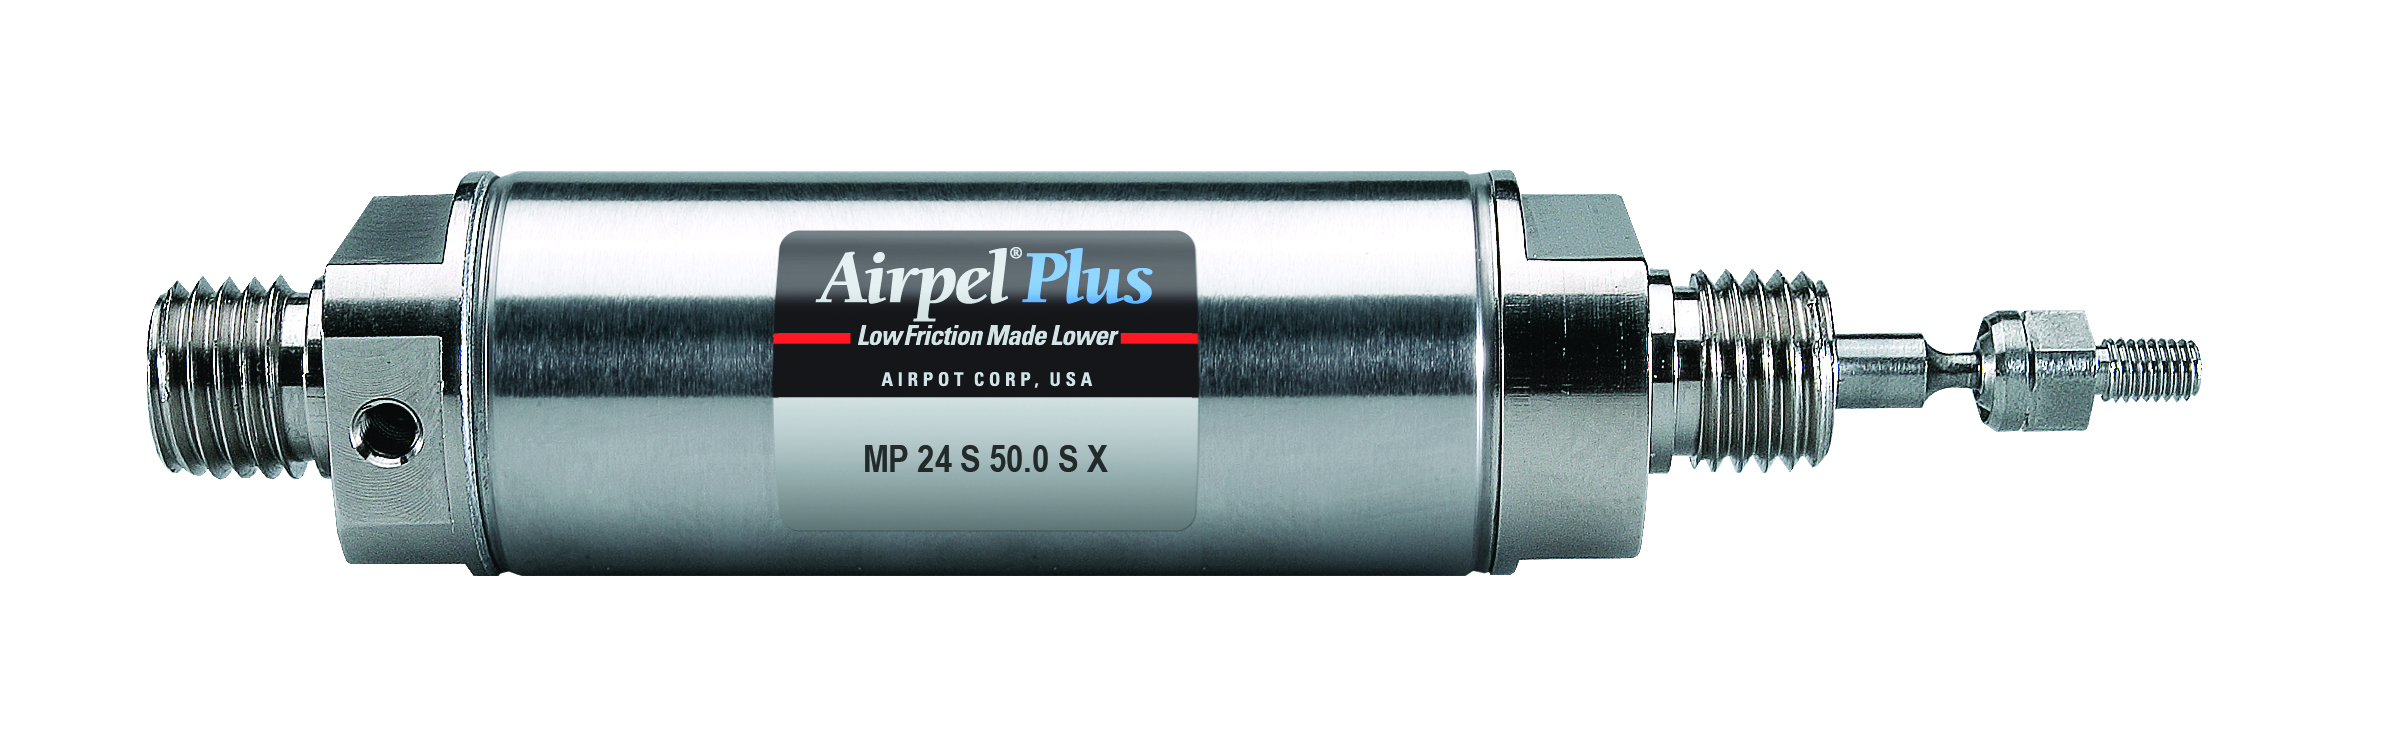 AIRPOT AIRPEL 1004K DOUBLE ACTING ANTI STICTION AIR CYLINDER E 24 D4.0 U 